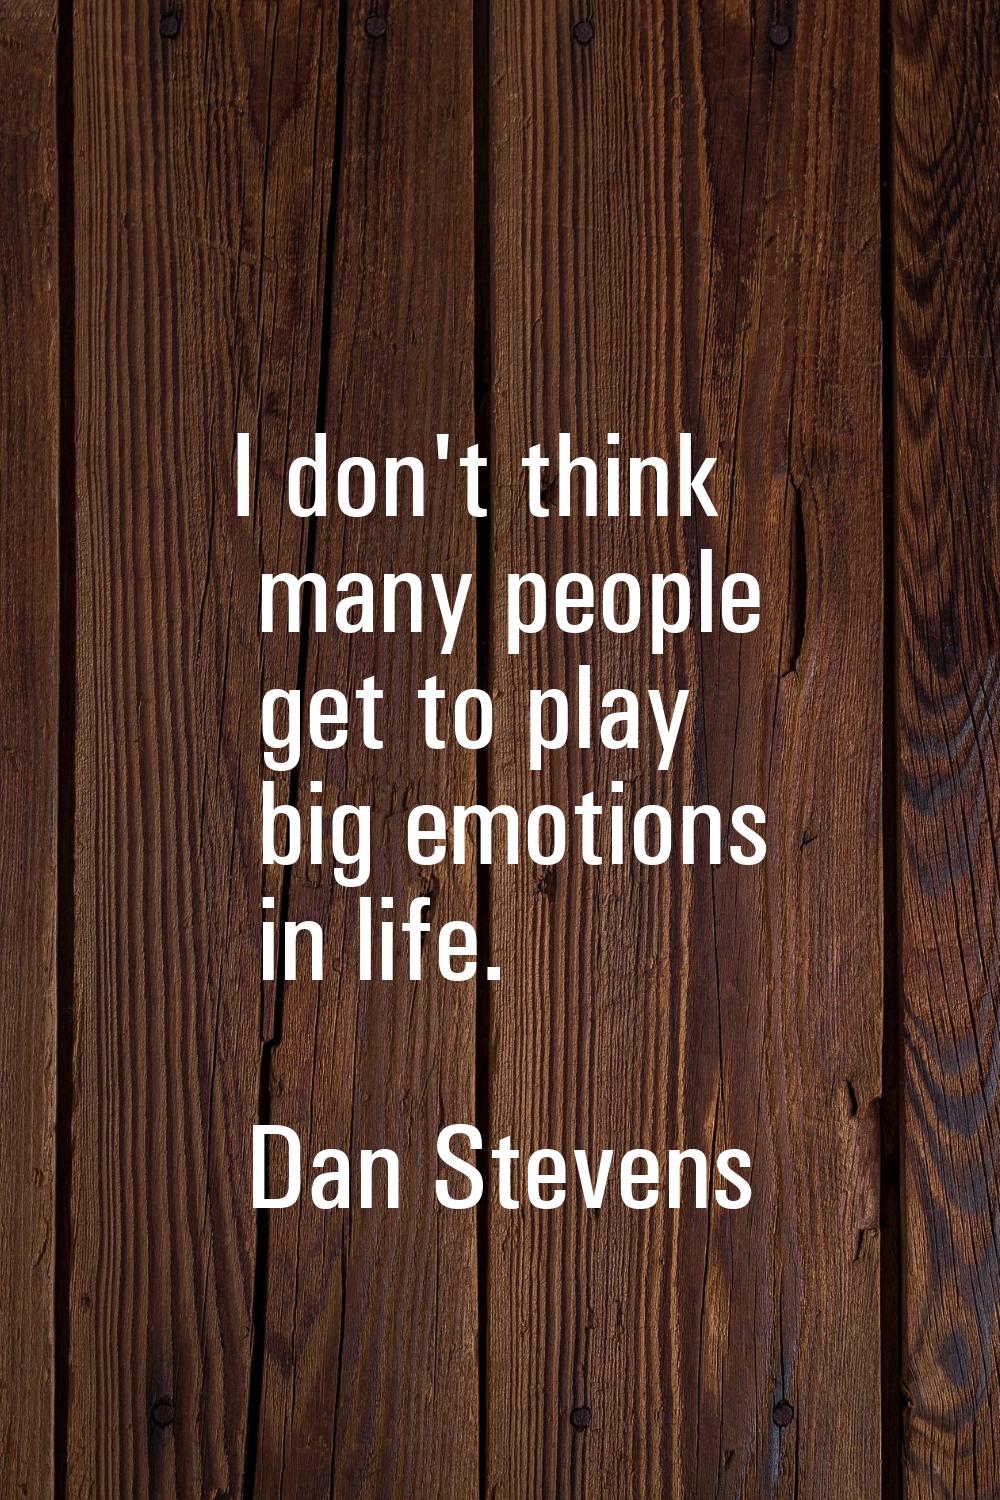 I don't think many people get to play big emotions in life.